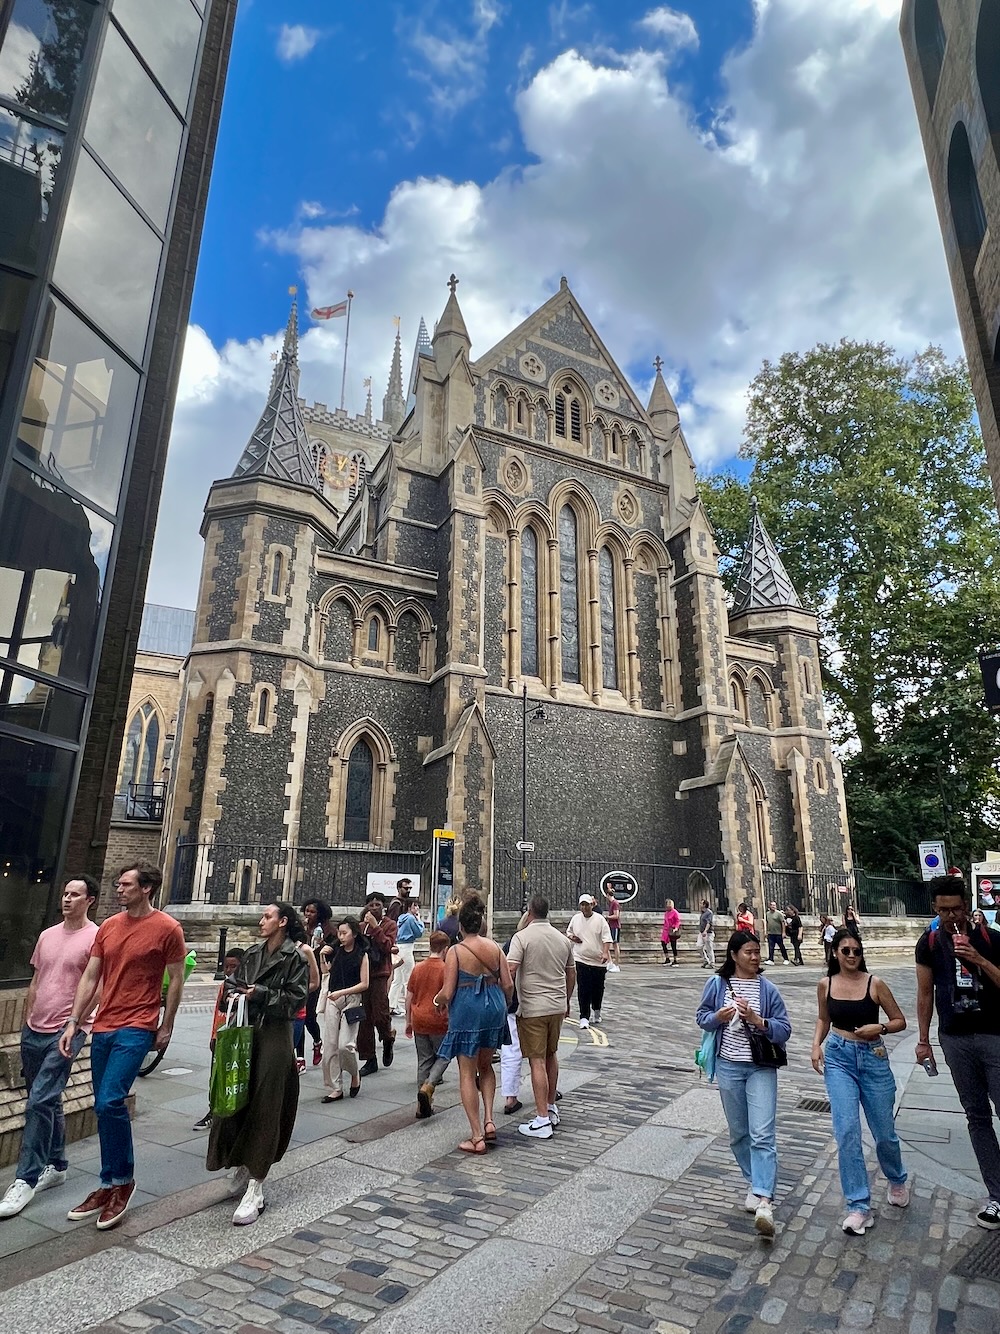 Exterior of Southwark Cathedral in London. Photo Credit: © Ursula Petula Barzey.